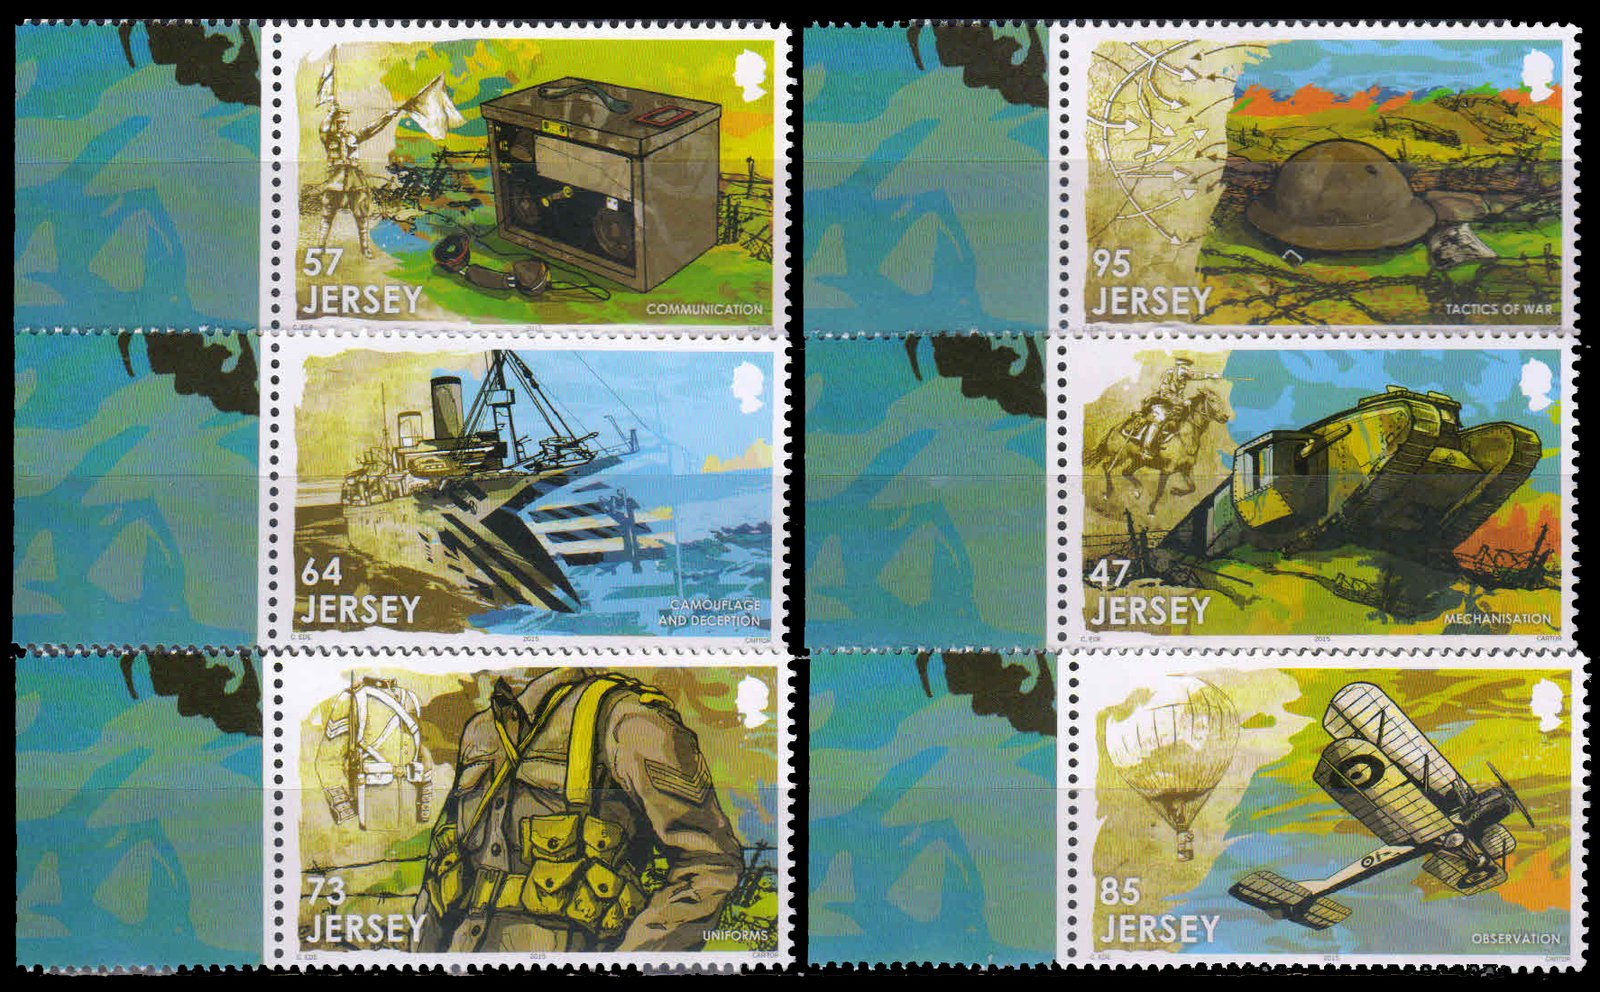 JERSEY 2015-Cent of the Great 1st World War, Military-Aircraft, Ship, Set of 6, MNH, Face � 4.1-S.G. 1977-1982-Cat � 11.50